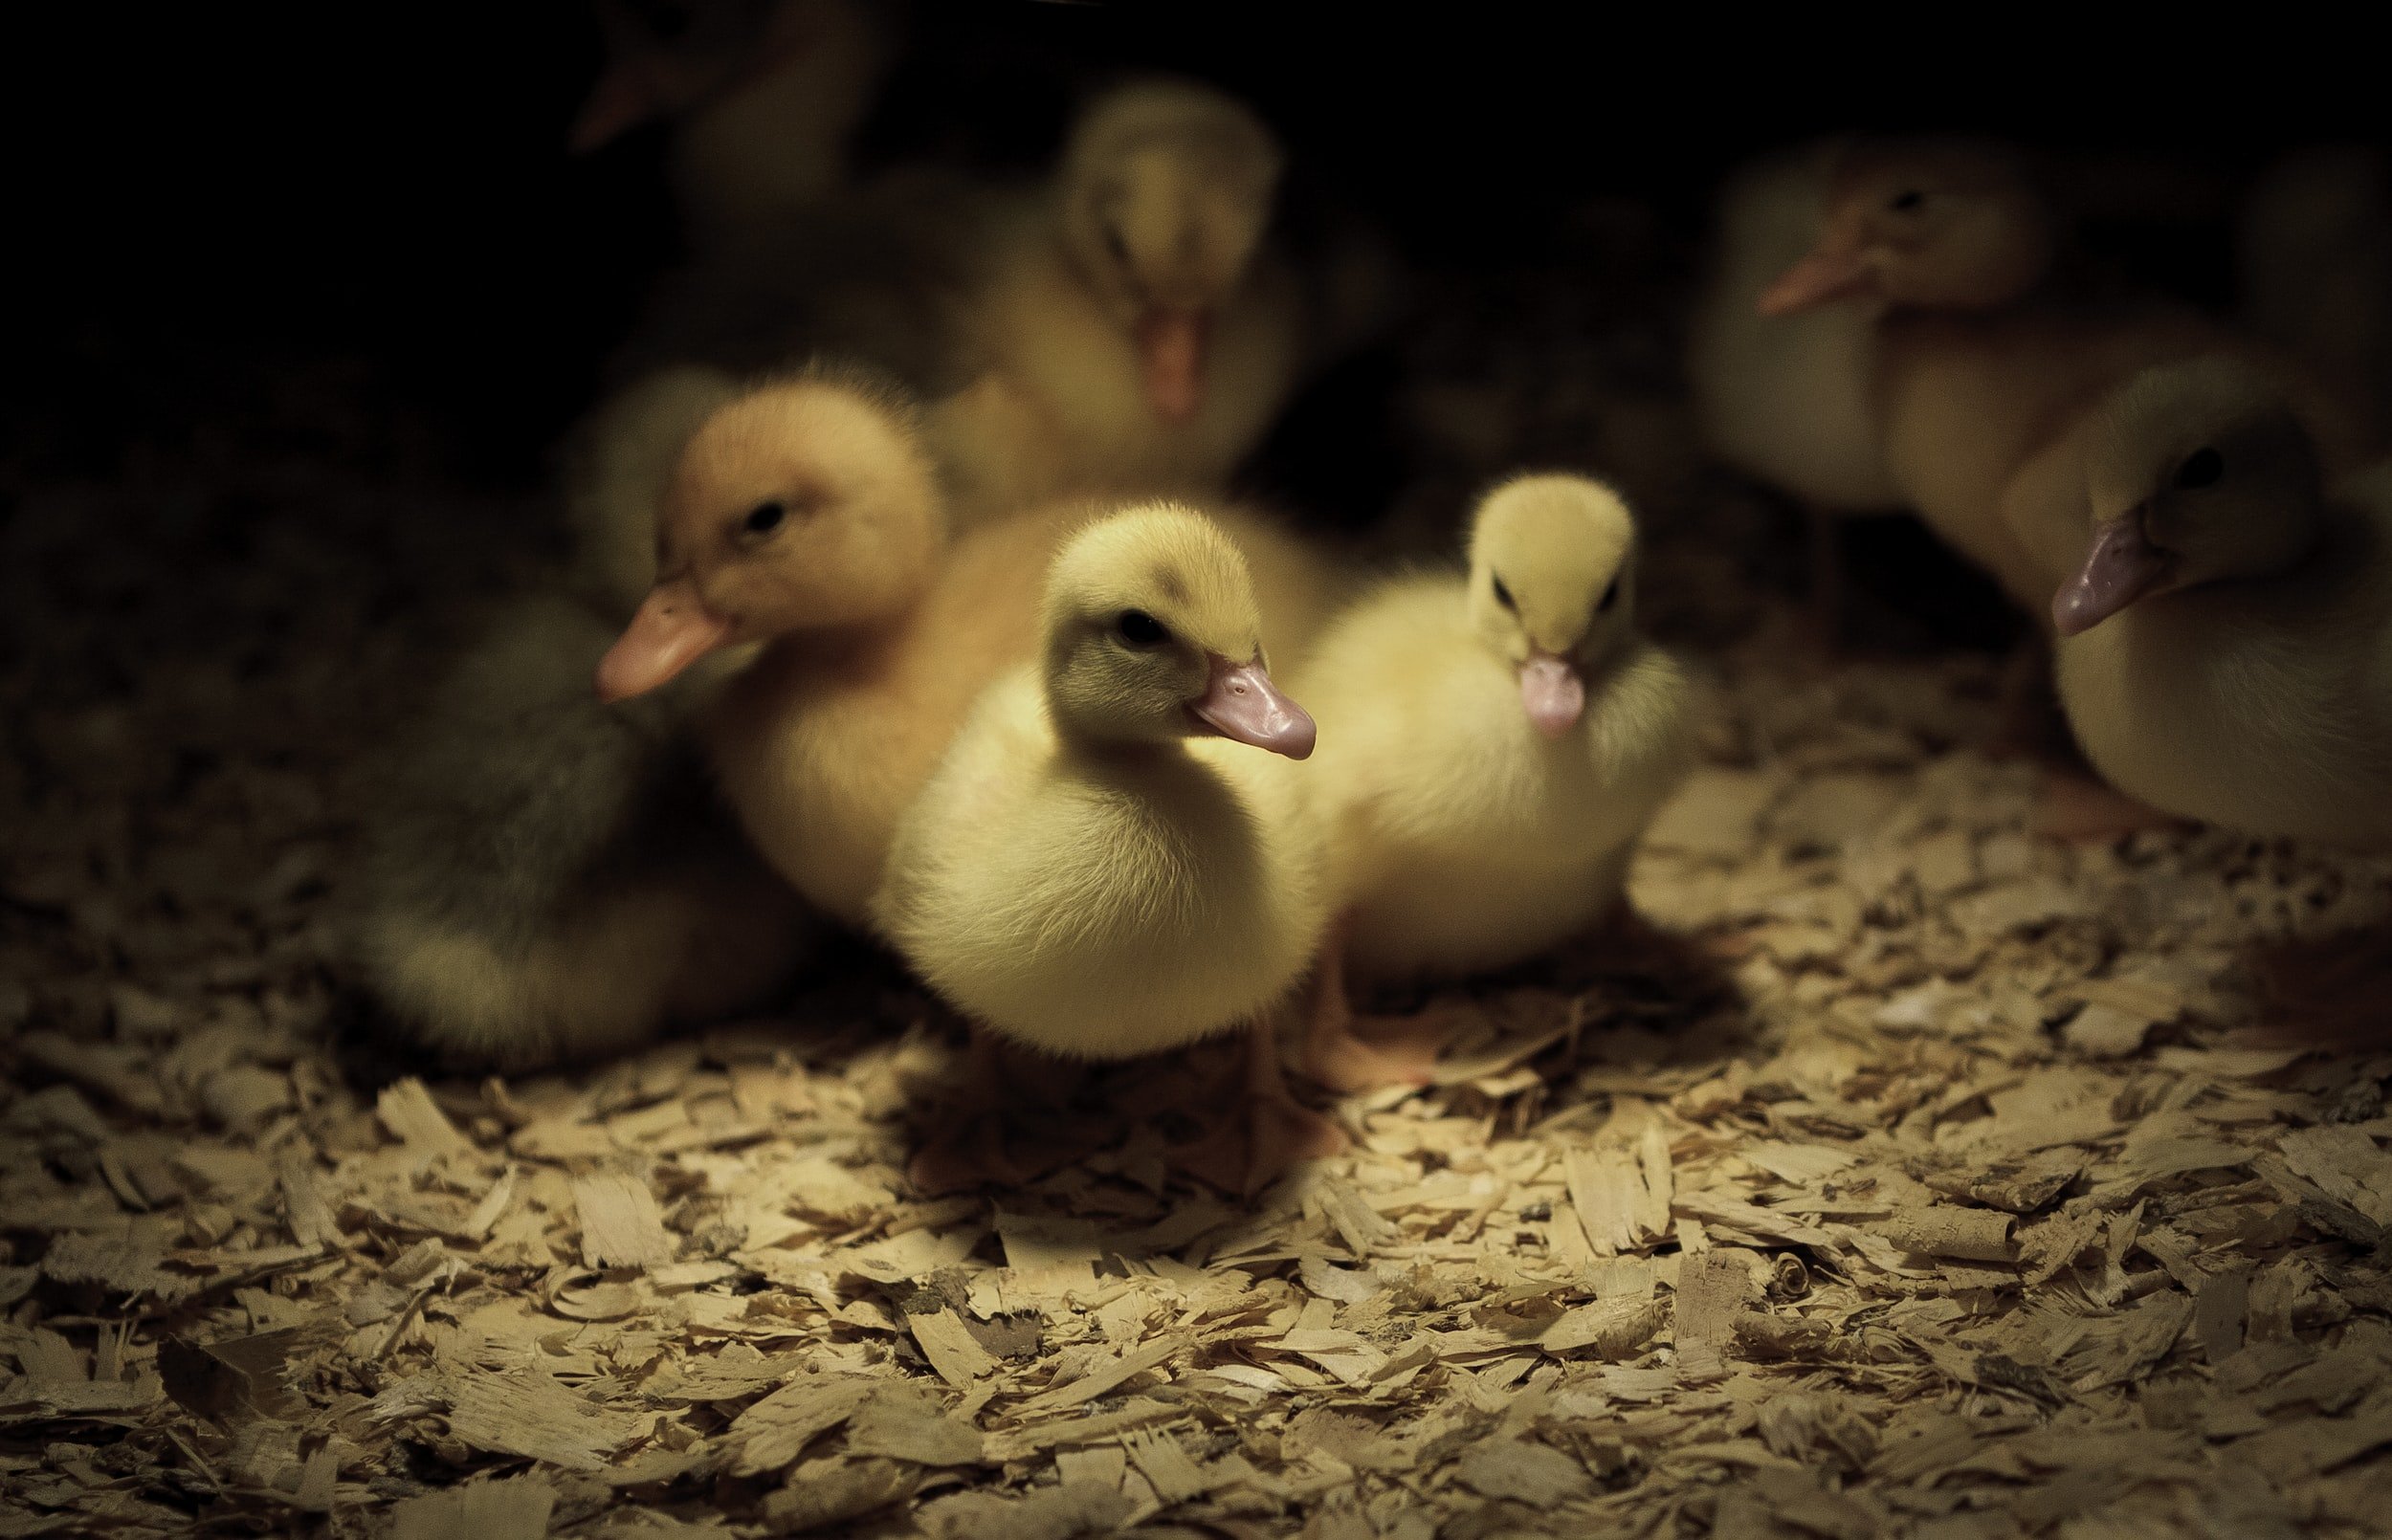 Caring for Wildlife: Cute Baby Ducks - Dyrenes Alliance works to protect animal rights from an early age. Support our efforts to preserve the innocence and safety of baby animals